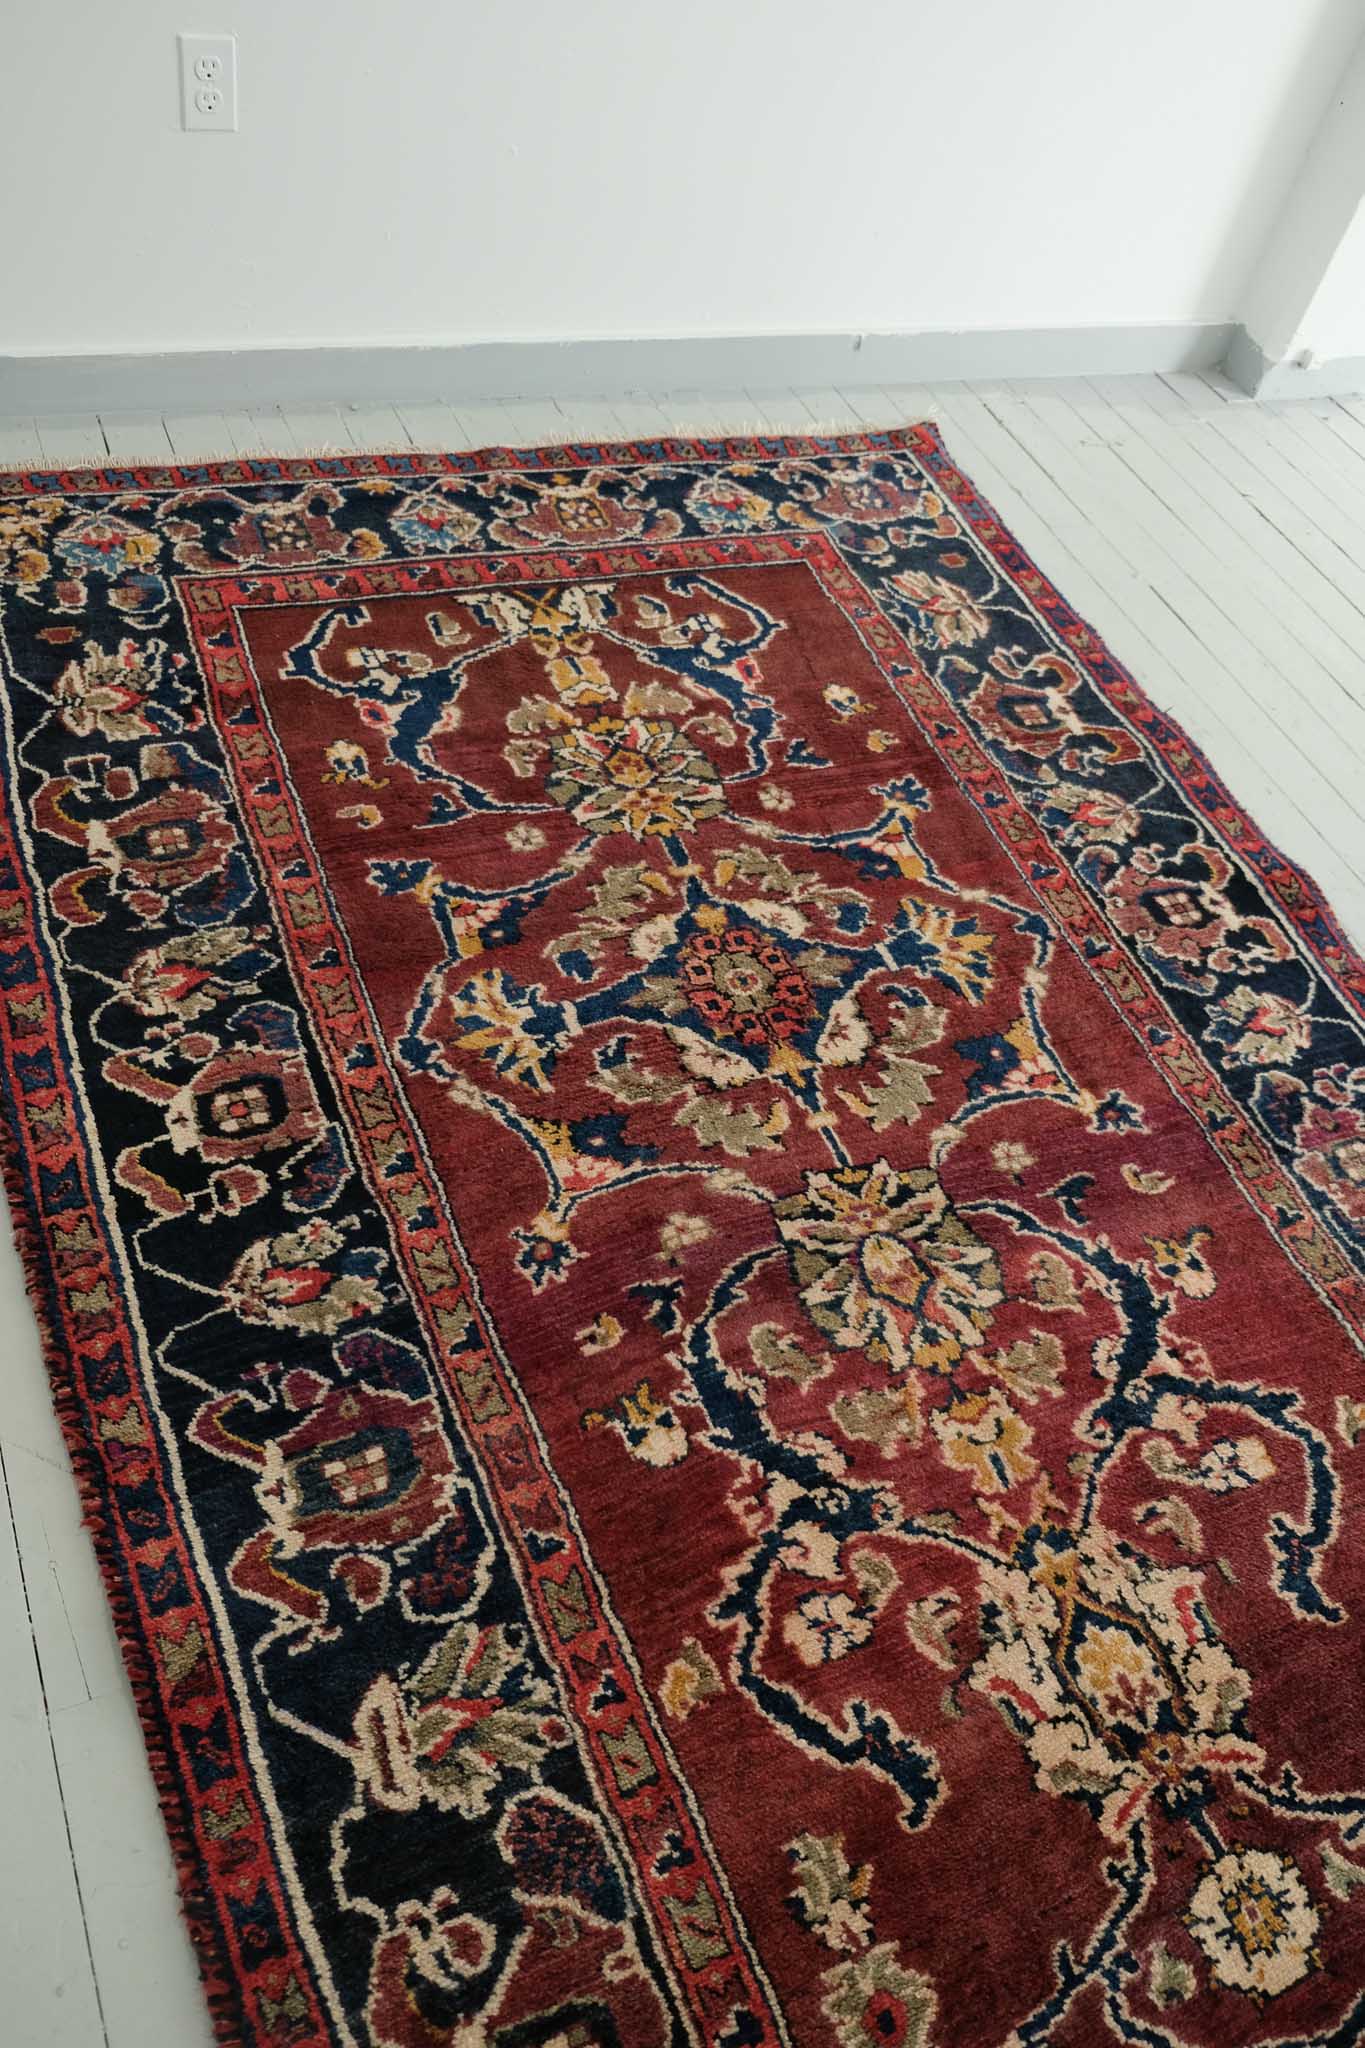 Knotted Wool Persian Area Rug 5'3" x 8'6"